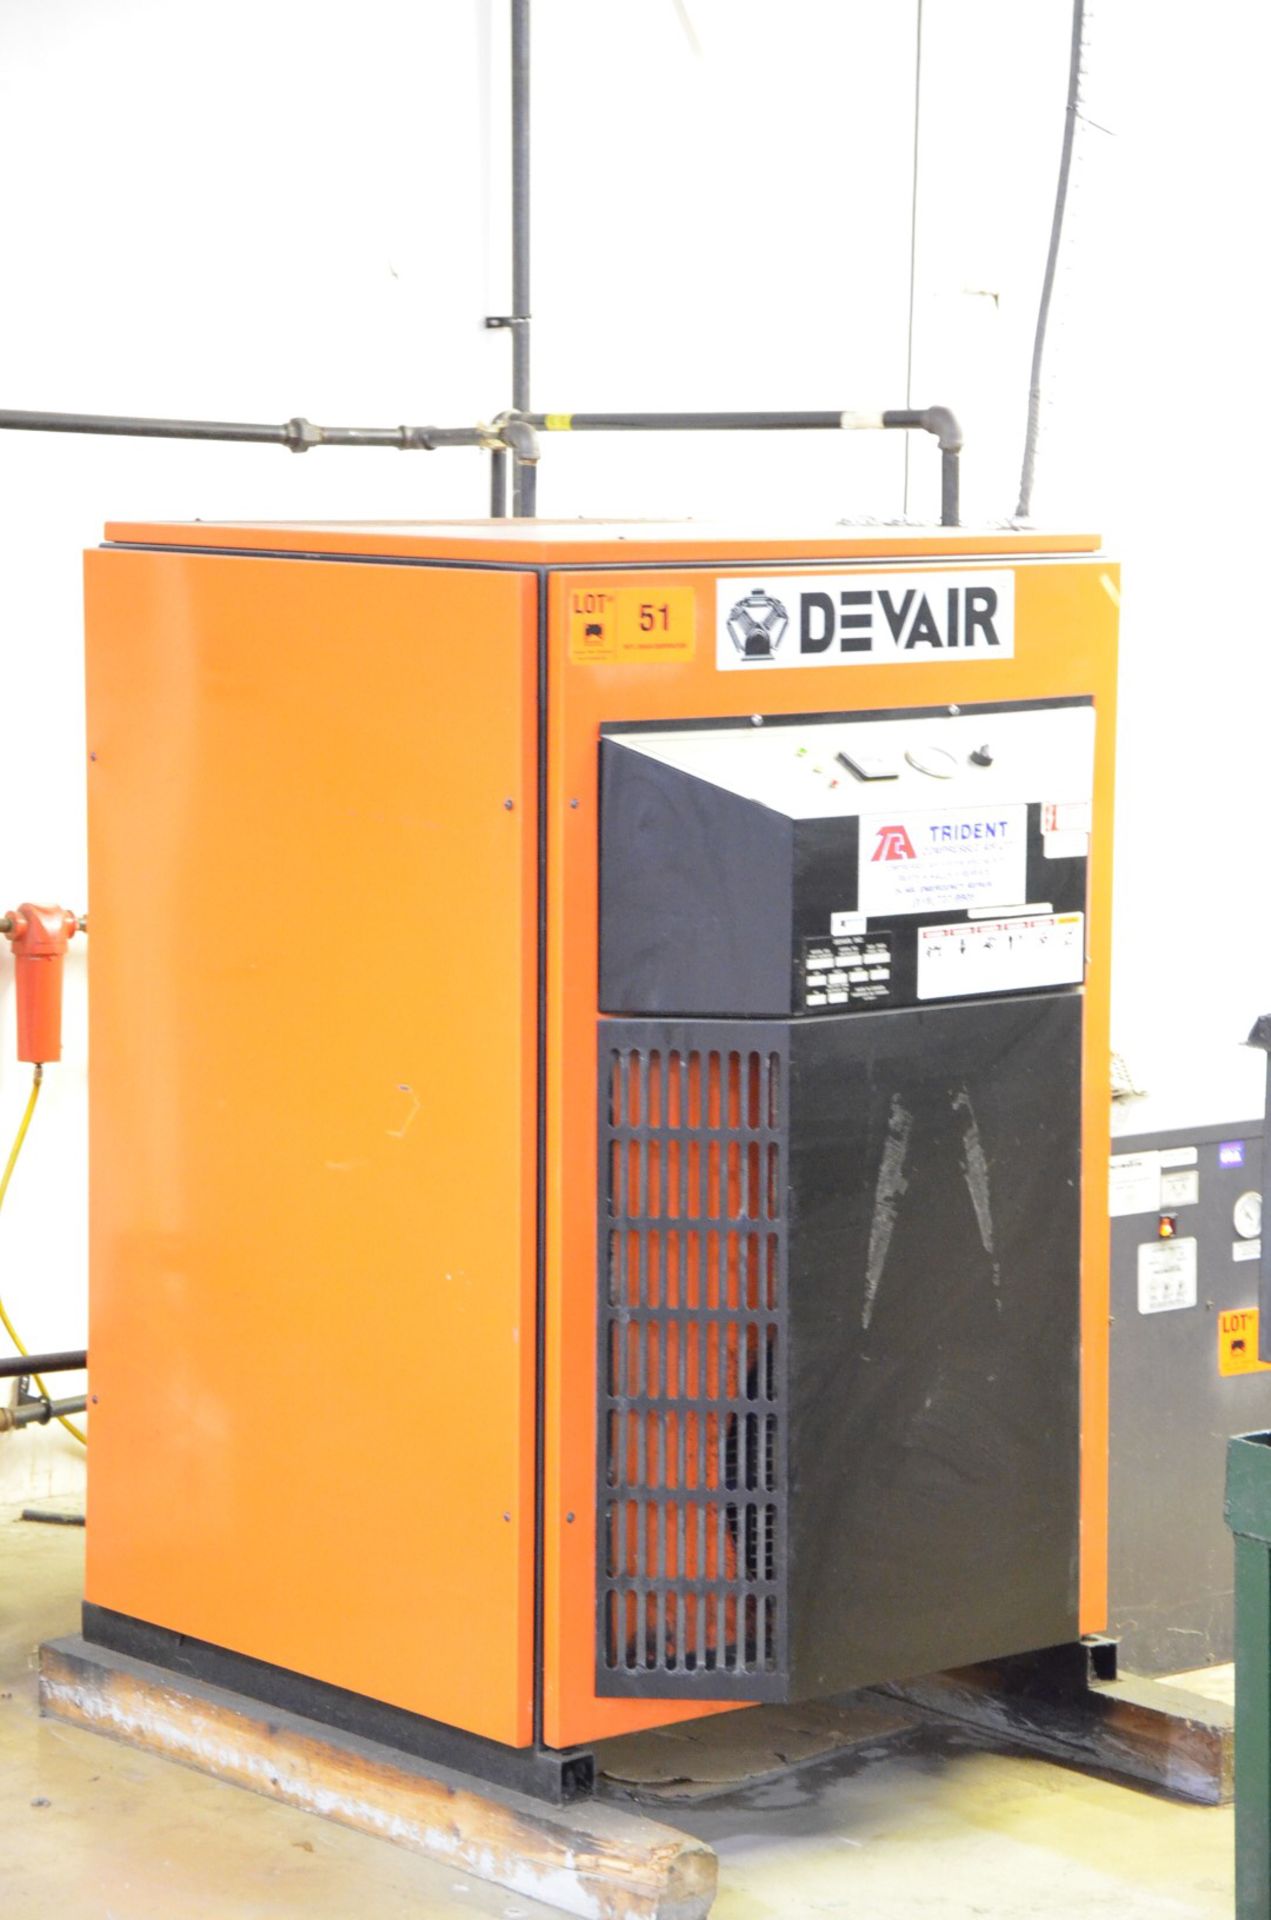 DEVAIR VAVC-5000 15 HP AIR COMPRESSOR WITH 175 MAX. PSI, 1760 RPM, 6,870 HOURS (RECORDED ON METER AT - Image 3 of 6